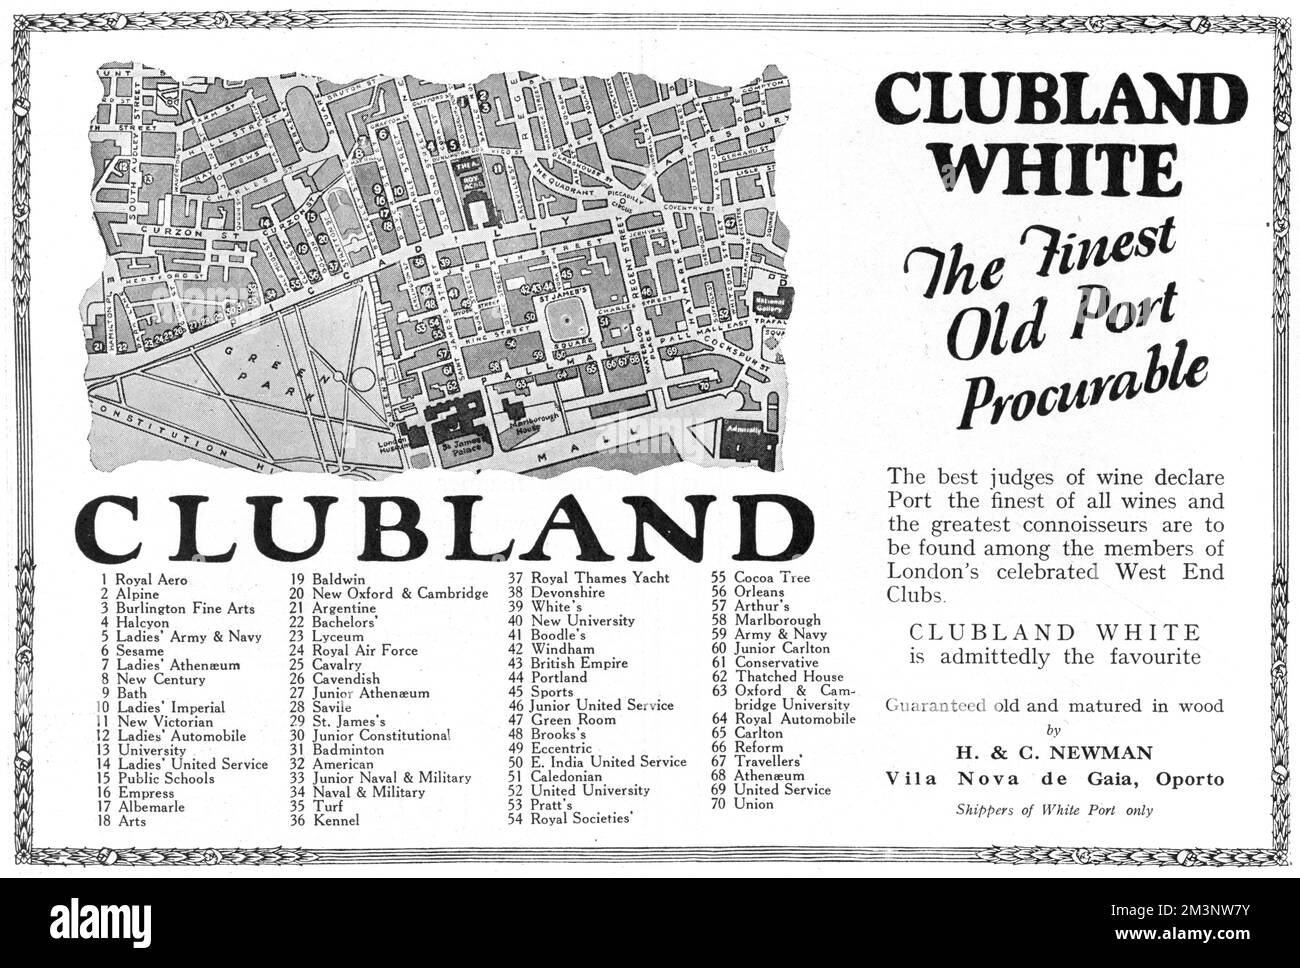 Advertisement for Clubland White, the 'finest old port procurable...to be found among the members of London's celebrated West End Clubs'.  The advert includes an interesting map and key to 70 of the clubs located in Central London, many of them still in existence today.     Date: 1927 Stock Photo